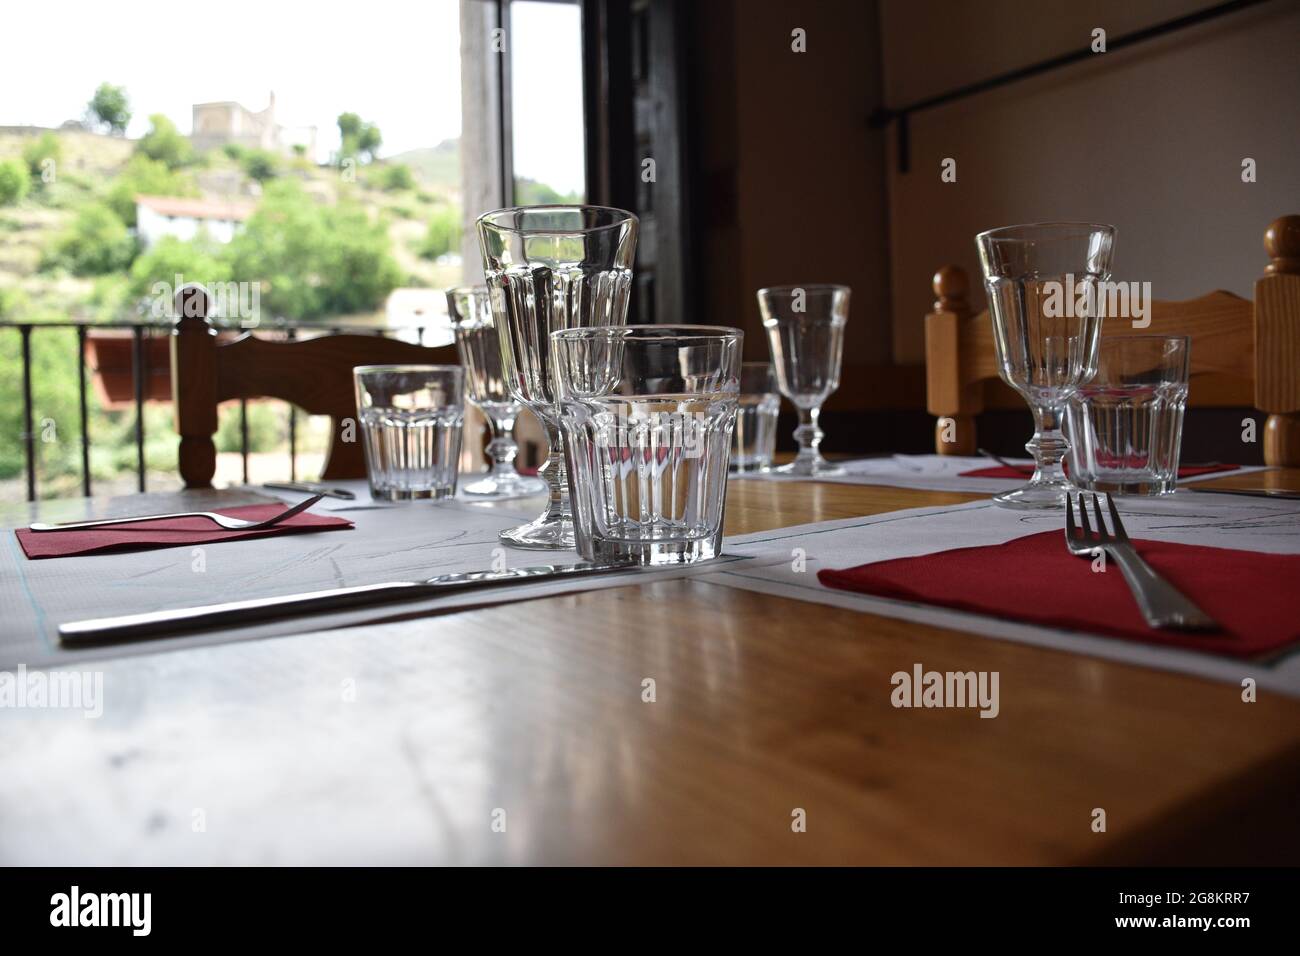 Crystal glass on assembled table ready to eat. Defocused background with tableware and window with mountain village views. La Rioja, Spain. Stock Photo